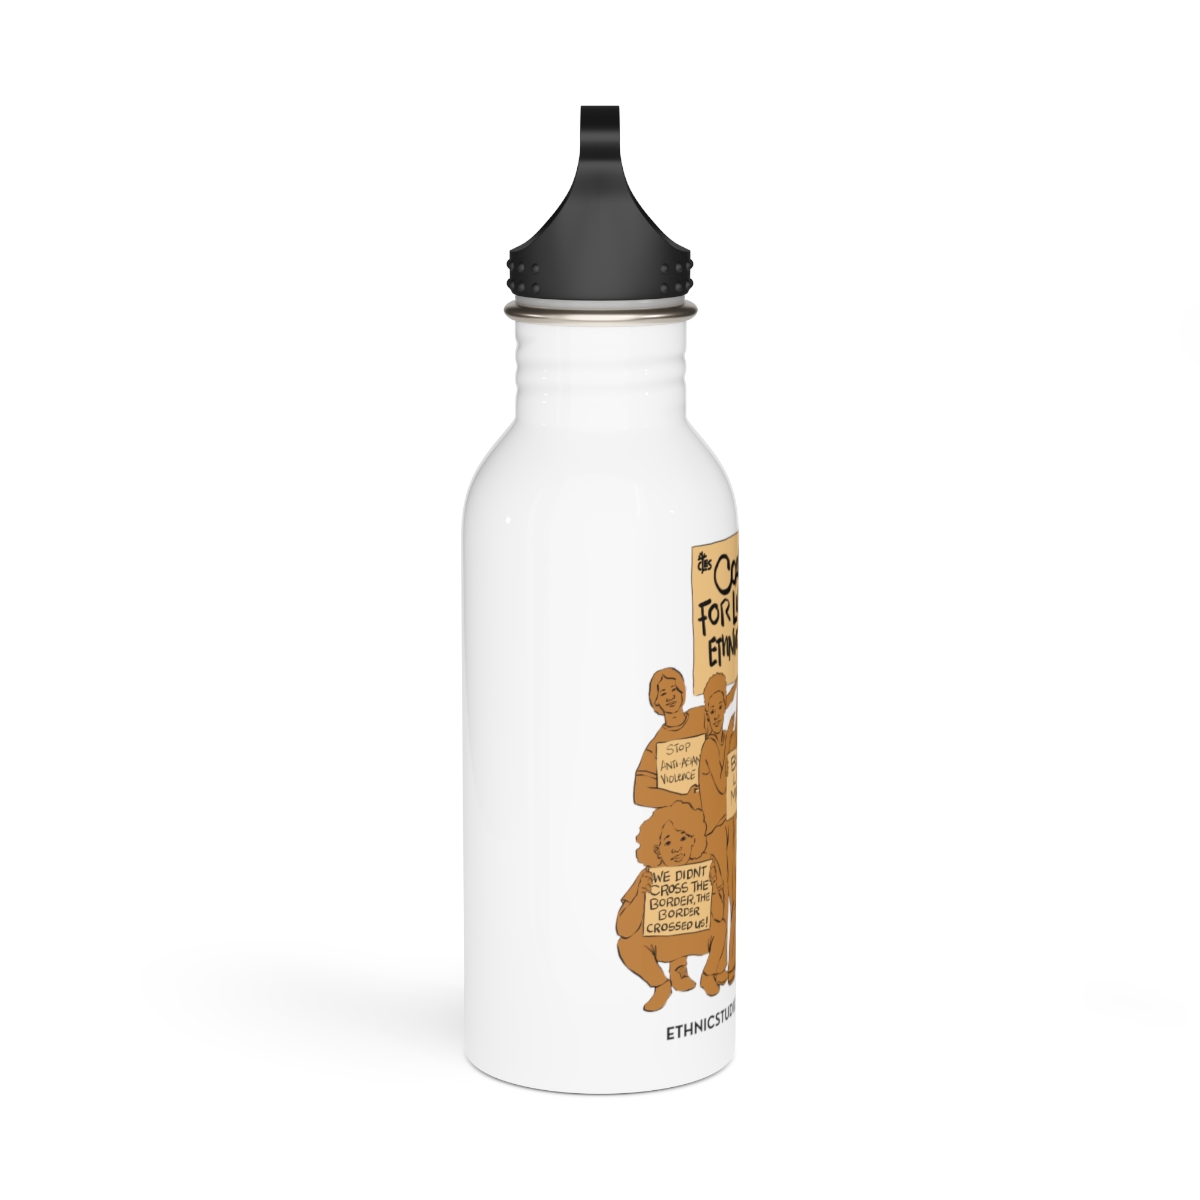 Coalition for Liberated Ethnic Studies Stainless Steel Water Bottle in Collaboration with Robert Liu-Trujillo product thumbnail image